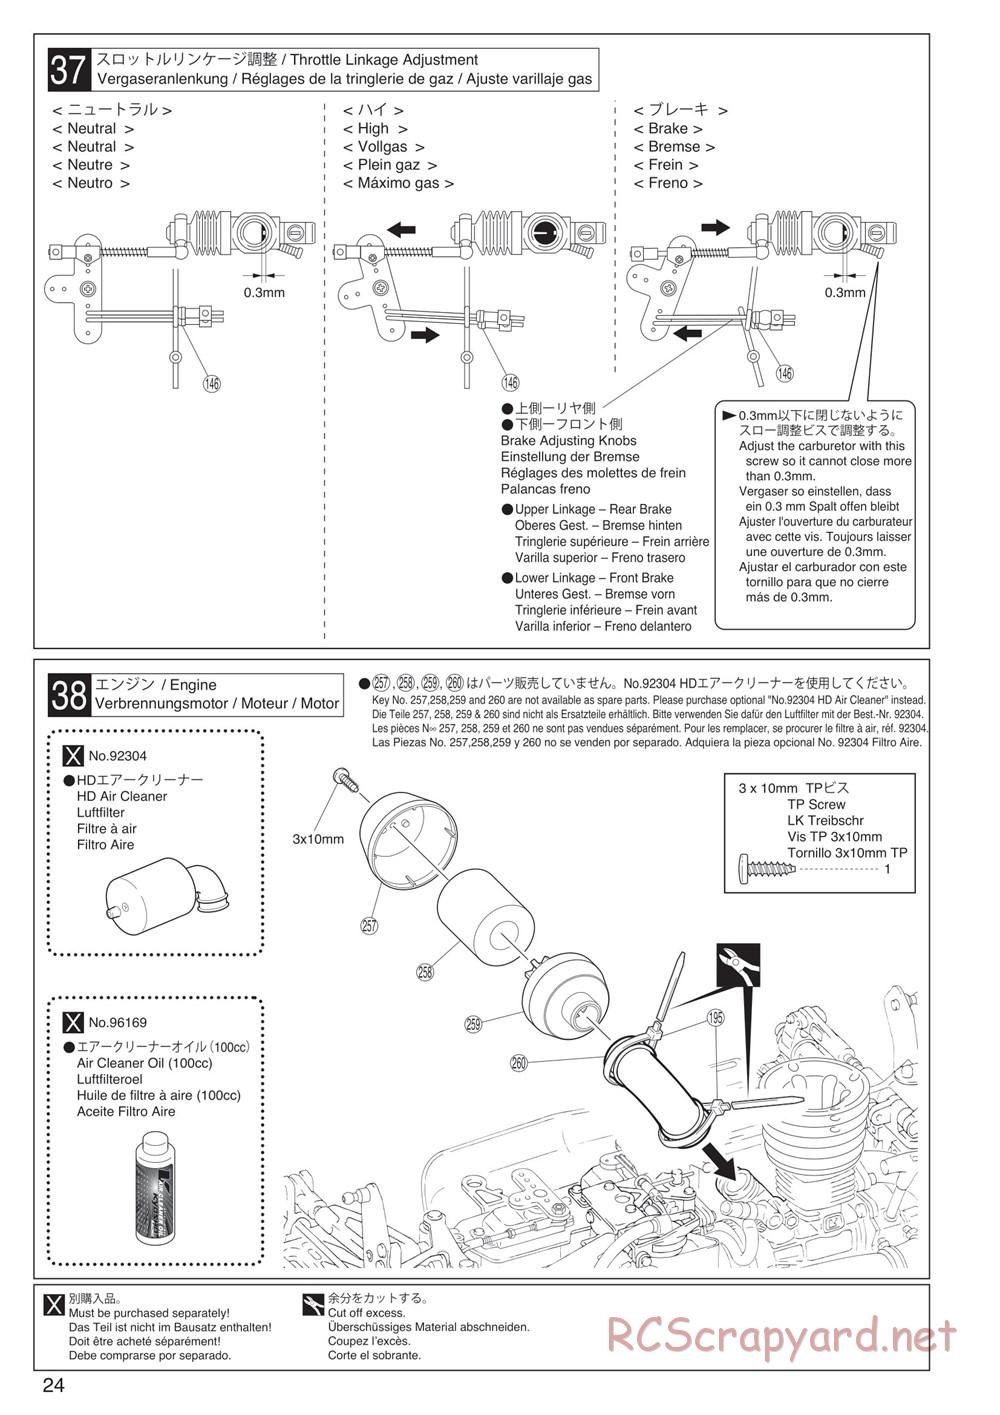 Kyosho - Inferno Neo - Manual - Page 24